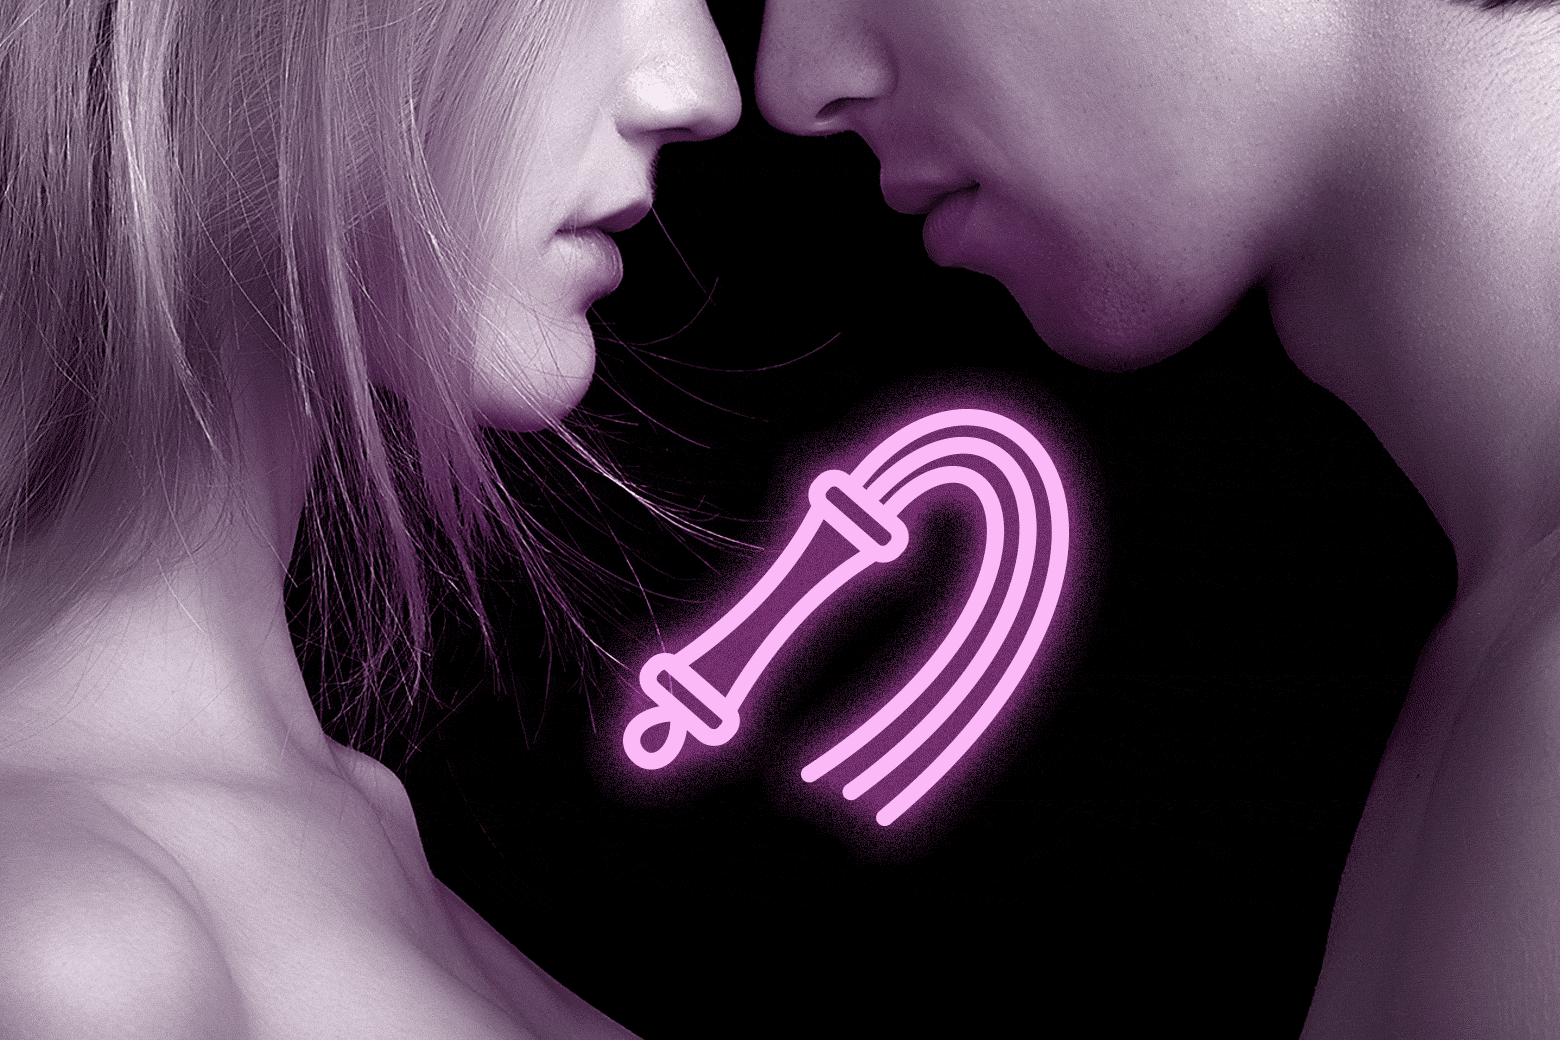 A naked man and woman hold their faces close to each other. A neon whip glows between them.